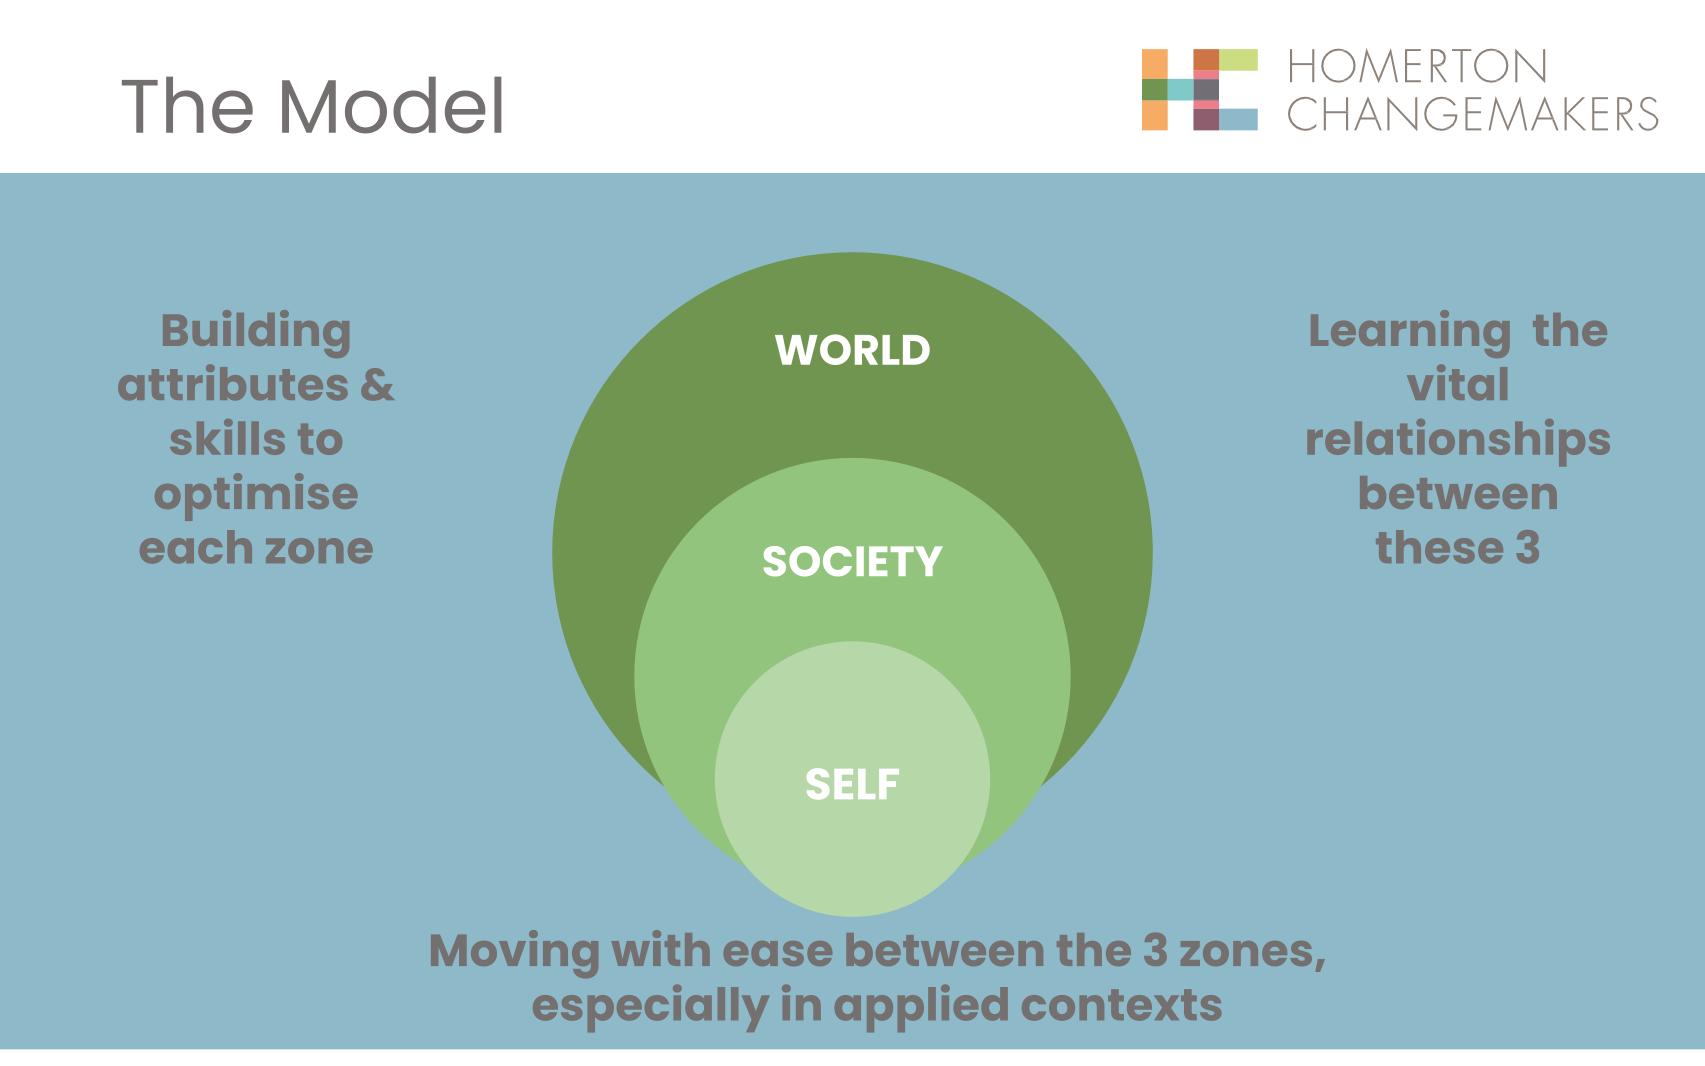 Three concentric circles laying out the Changemaker model: Self at core, then Society, then World